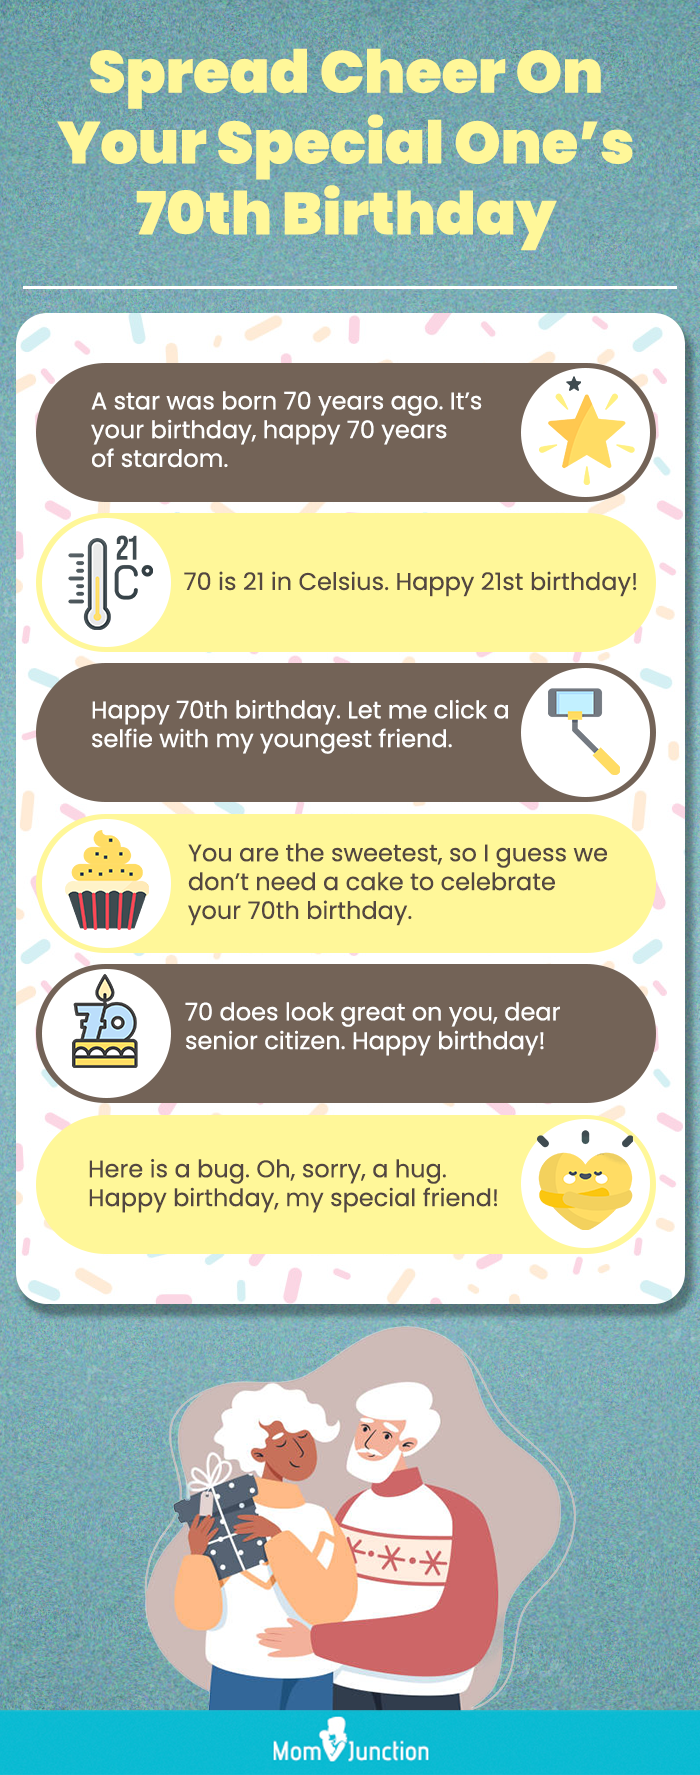 70th birthday wishes [infographic]